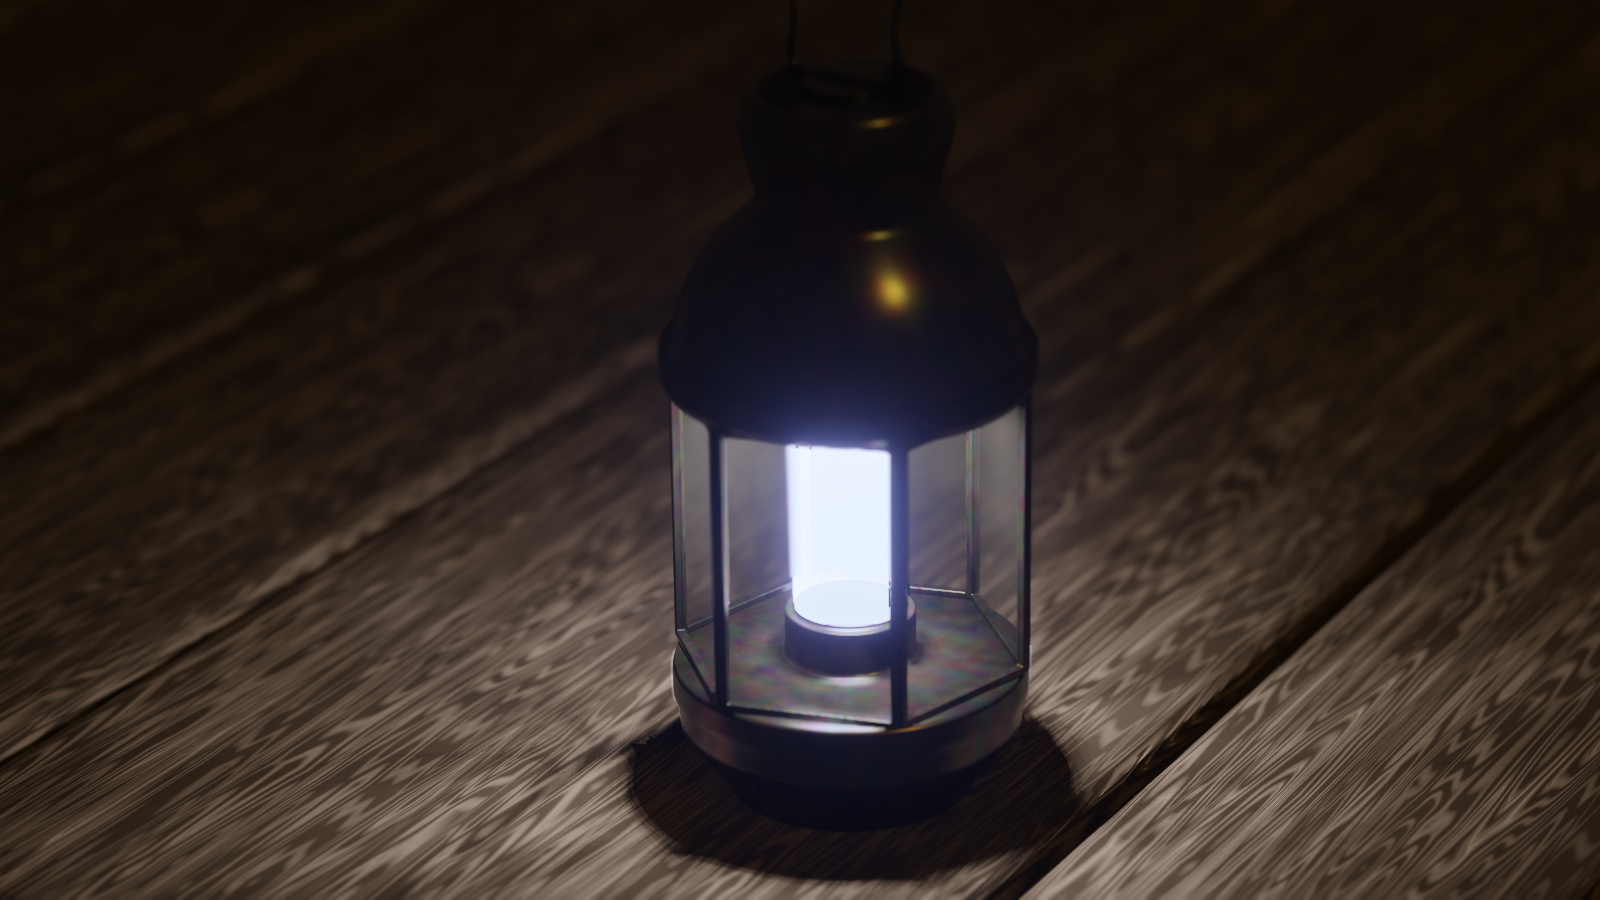 Modern fluorescent camp lantern made in the style of a traditional oil lantern. The lantern sheds its pale light on a rustic wood tabletop, of which only a little is visible.